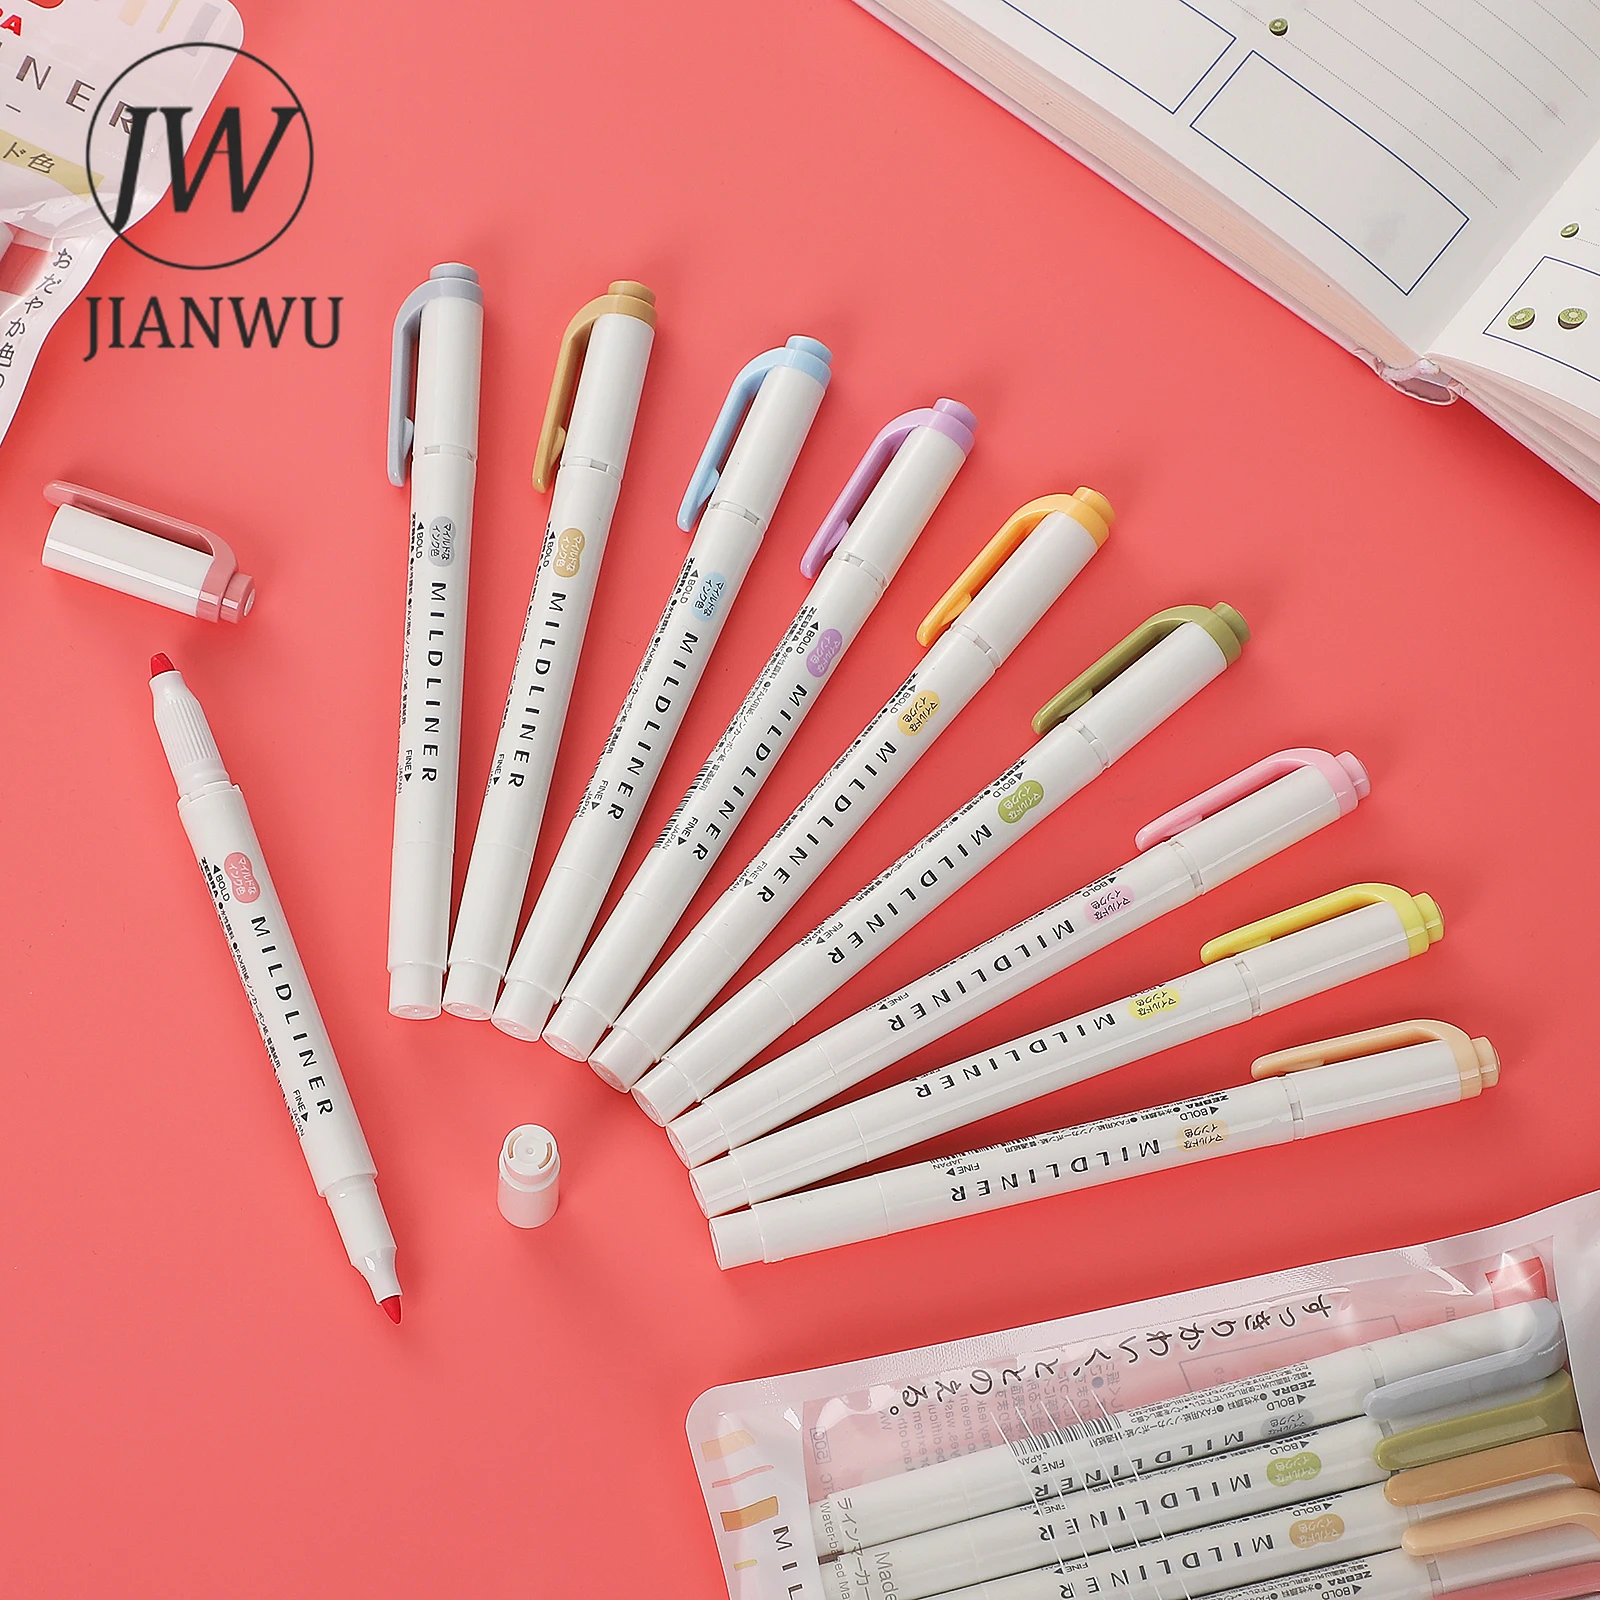 JIANWU 5Pcs/Set Mildliner Double-ended Highlighters Cute Soft Oblique Head Student Writing Marker Pen Kawaii Stationery Supplies images - 6